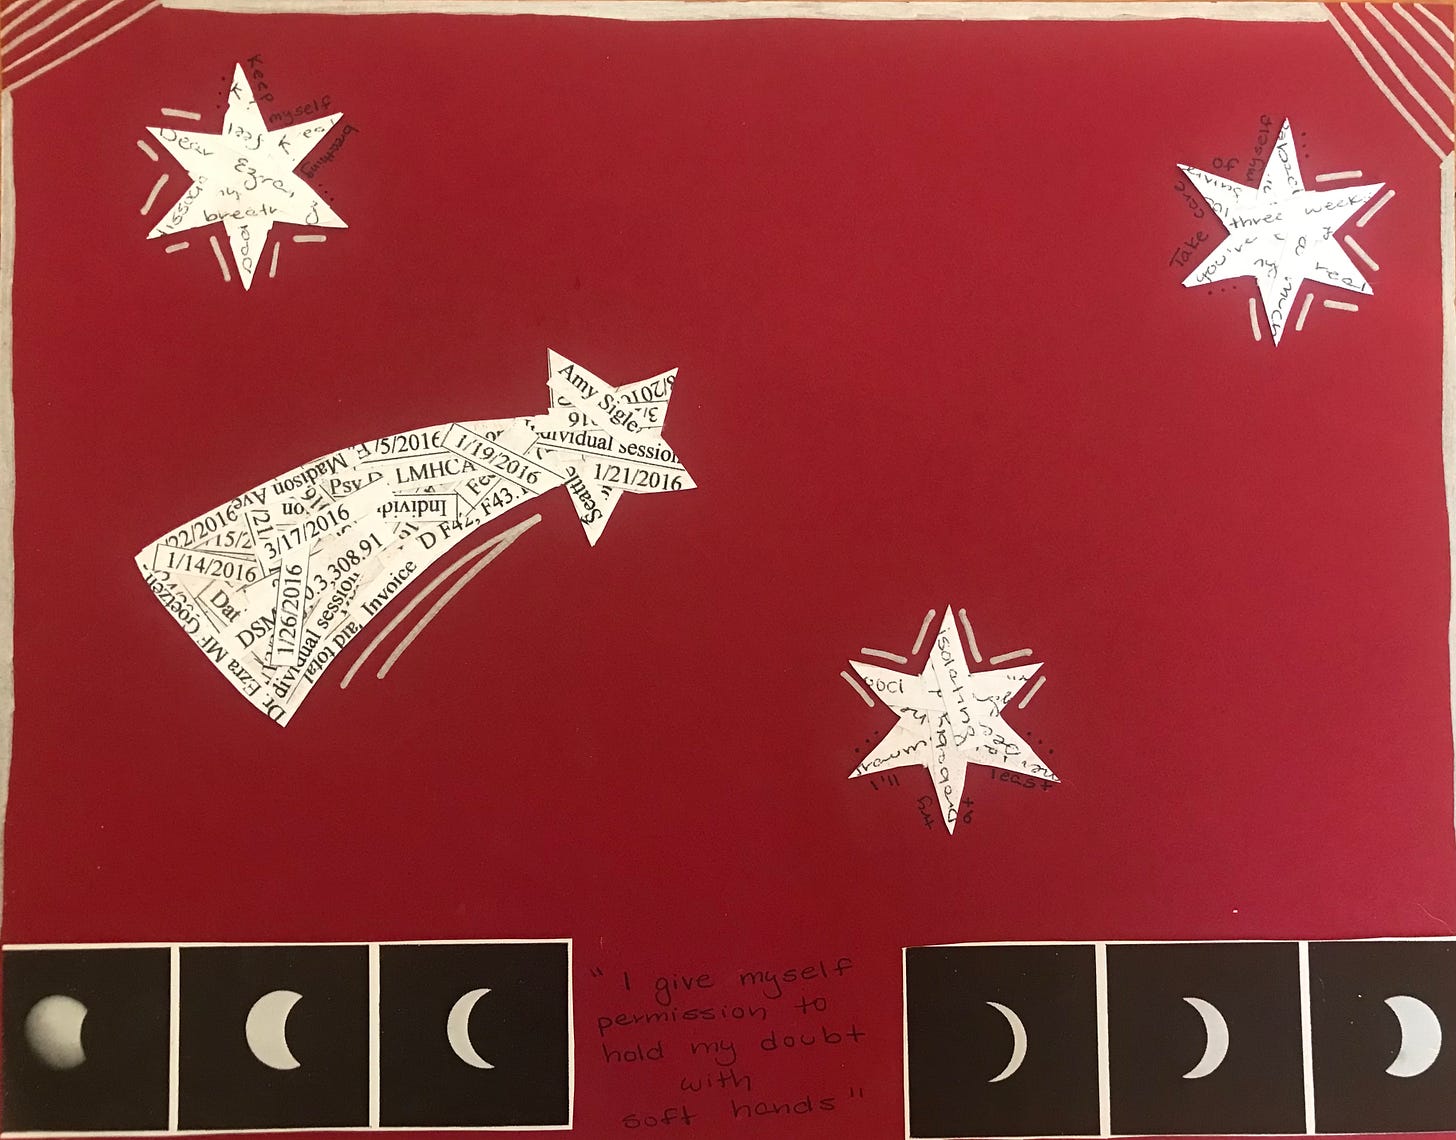 A deep red background. A collage made out of paper with writing on it into star and flying star shapes. There are pictures of moons in different phases at the bottom and small illegible writing.